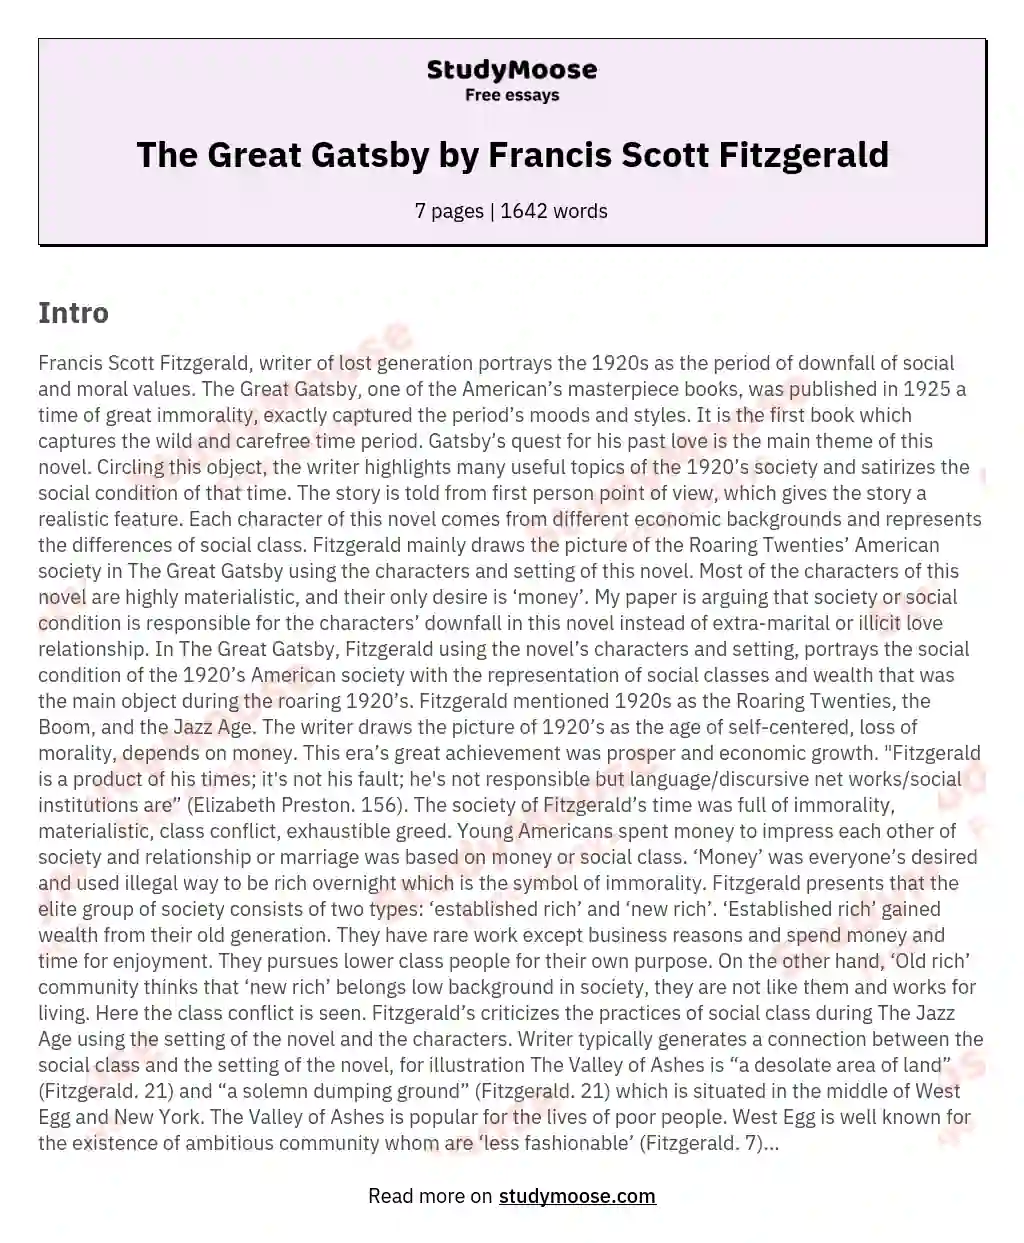 The Great Gatsby by Francis Scott Fitzgerald